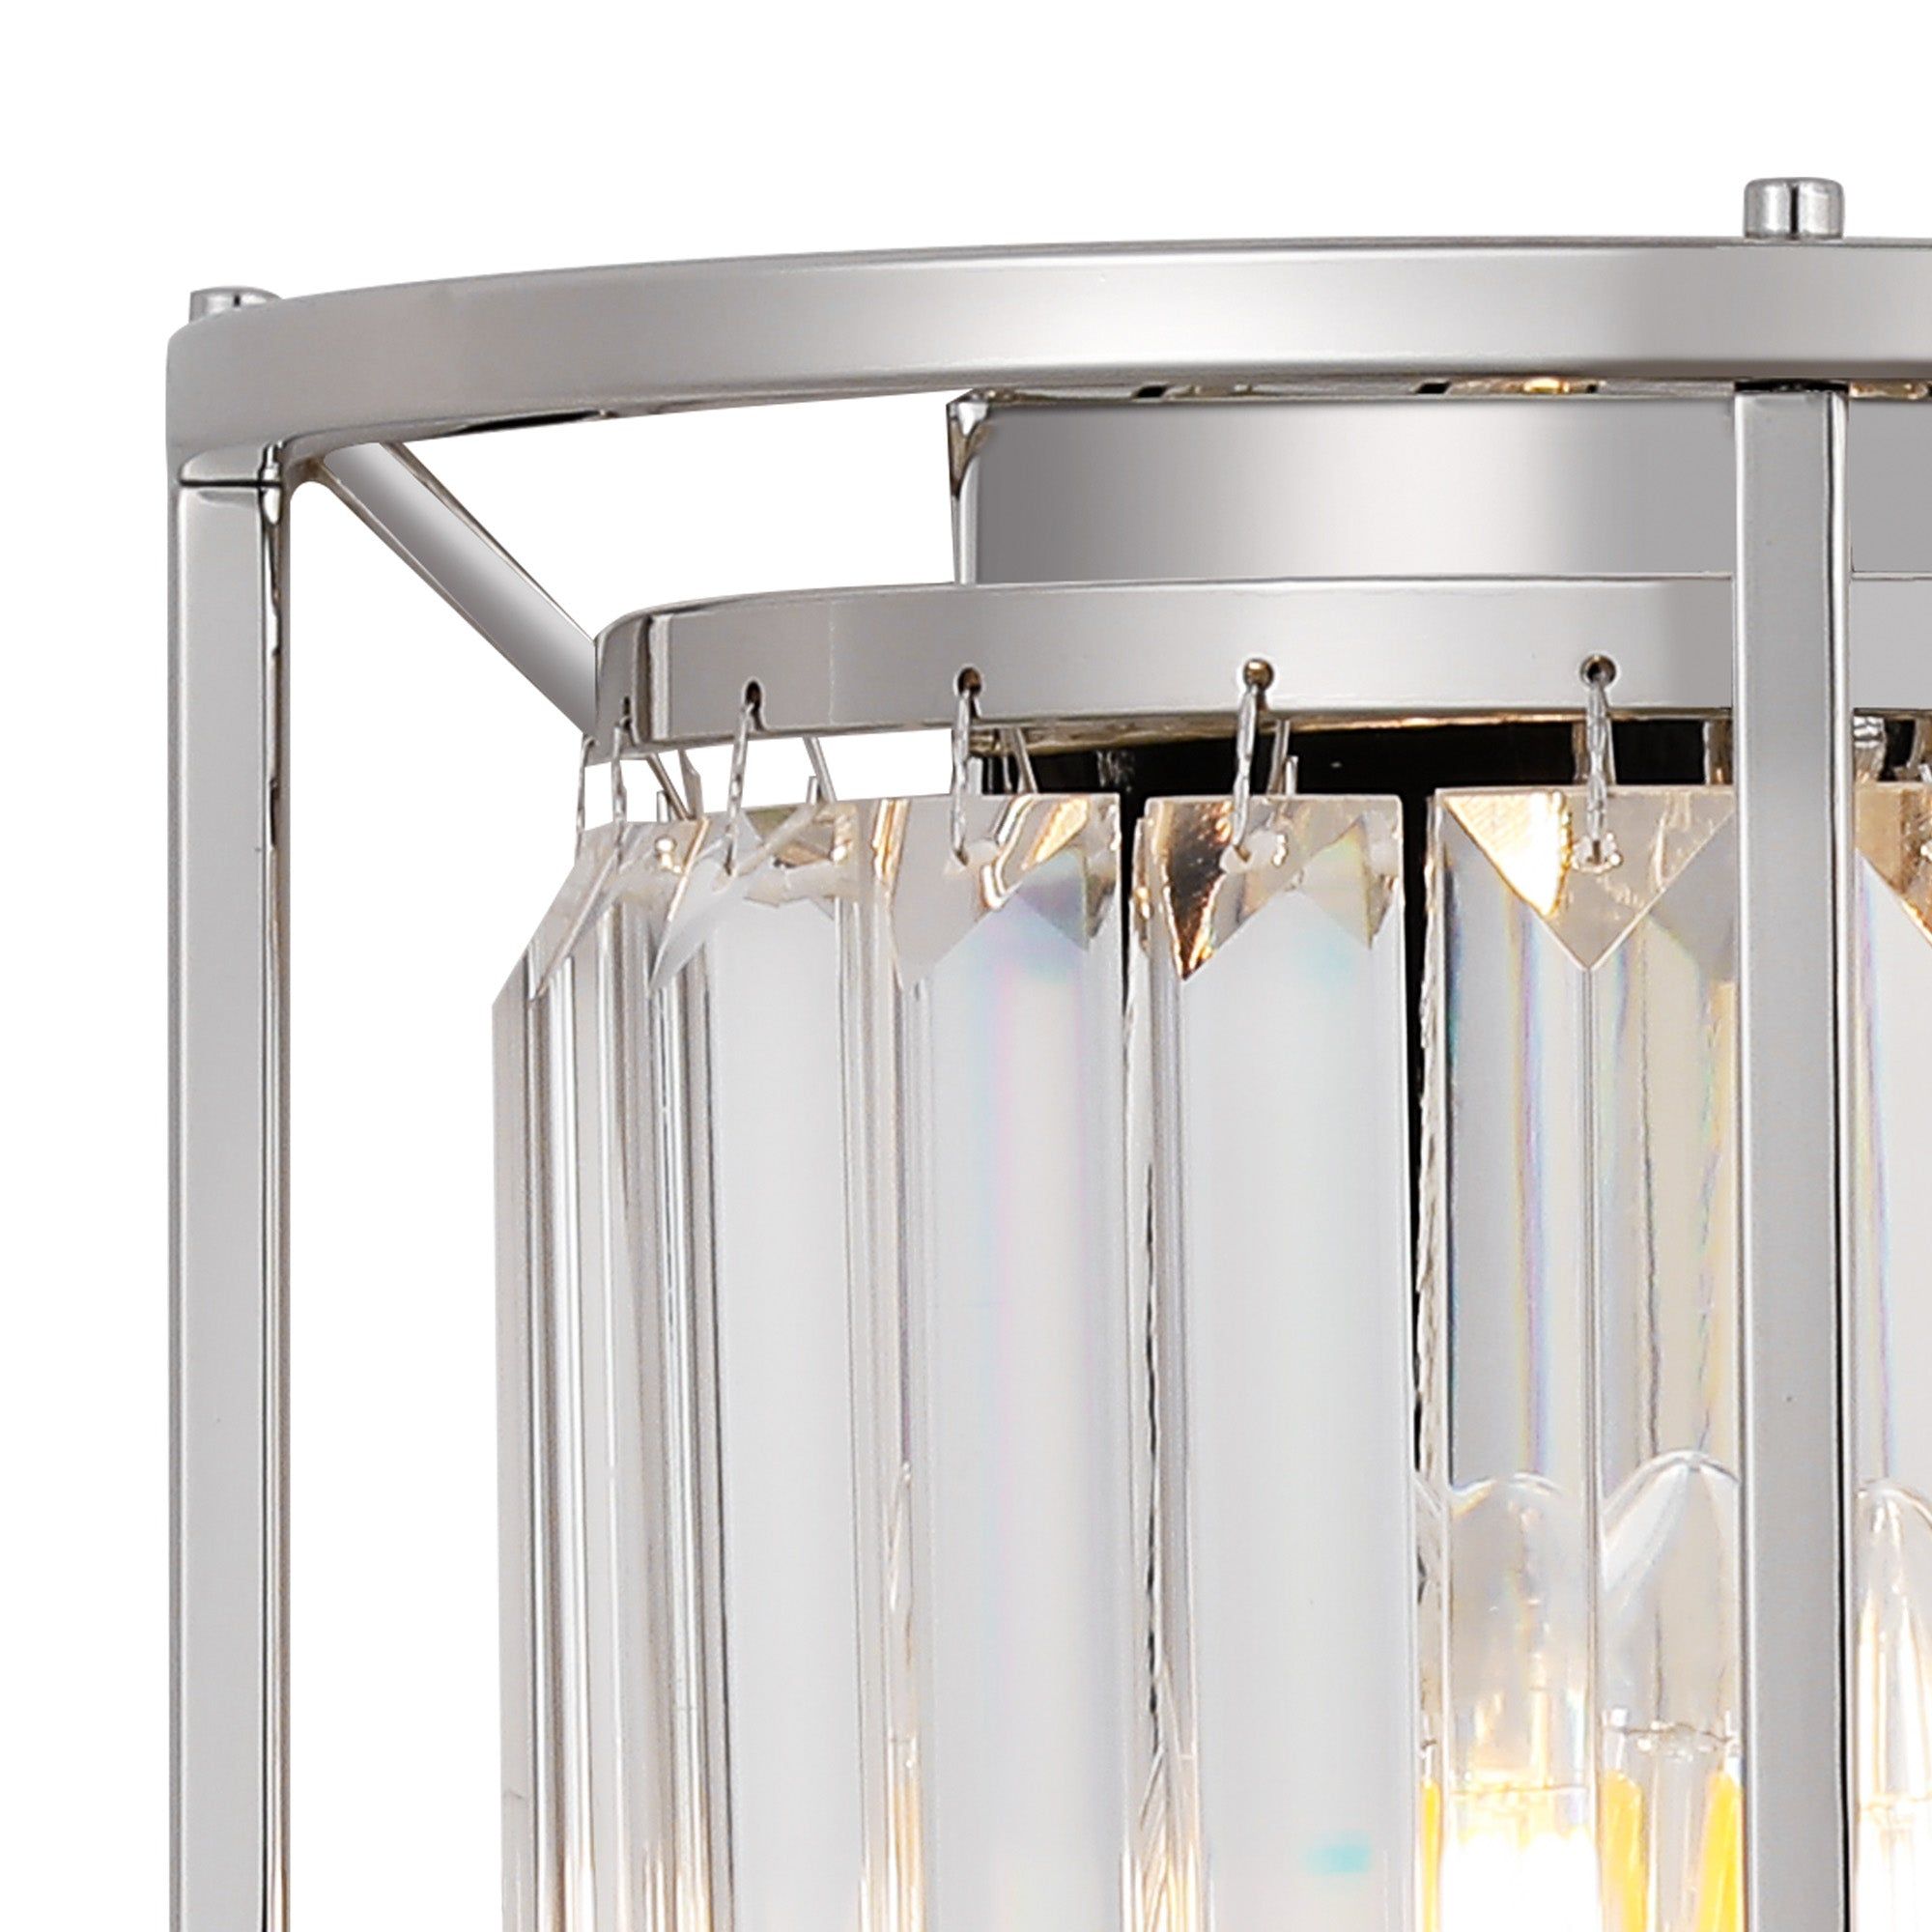 Belle Wall Light, 2Lt x E14 - Polished Nickel & Clear IP20